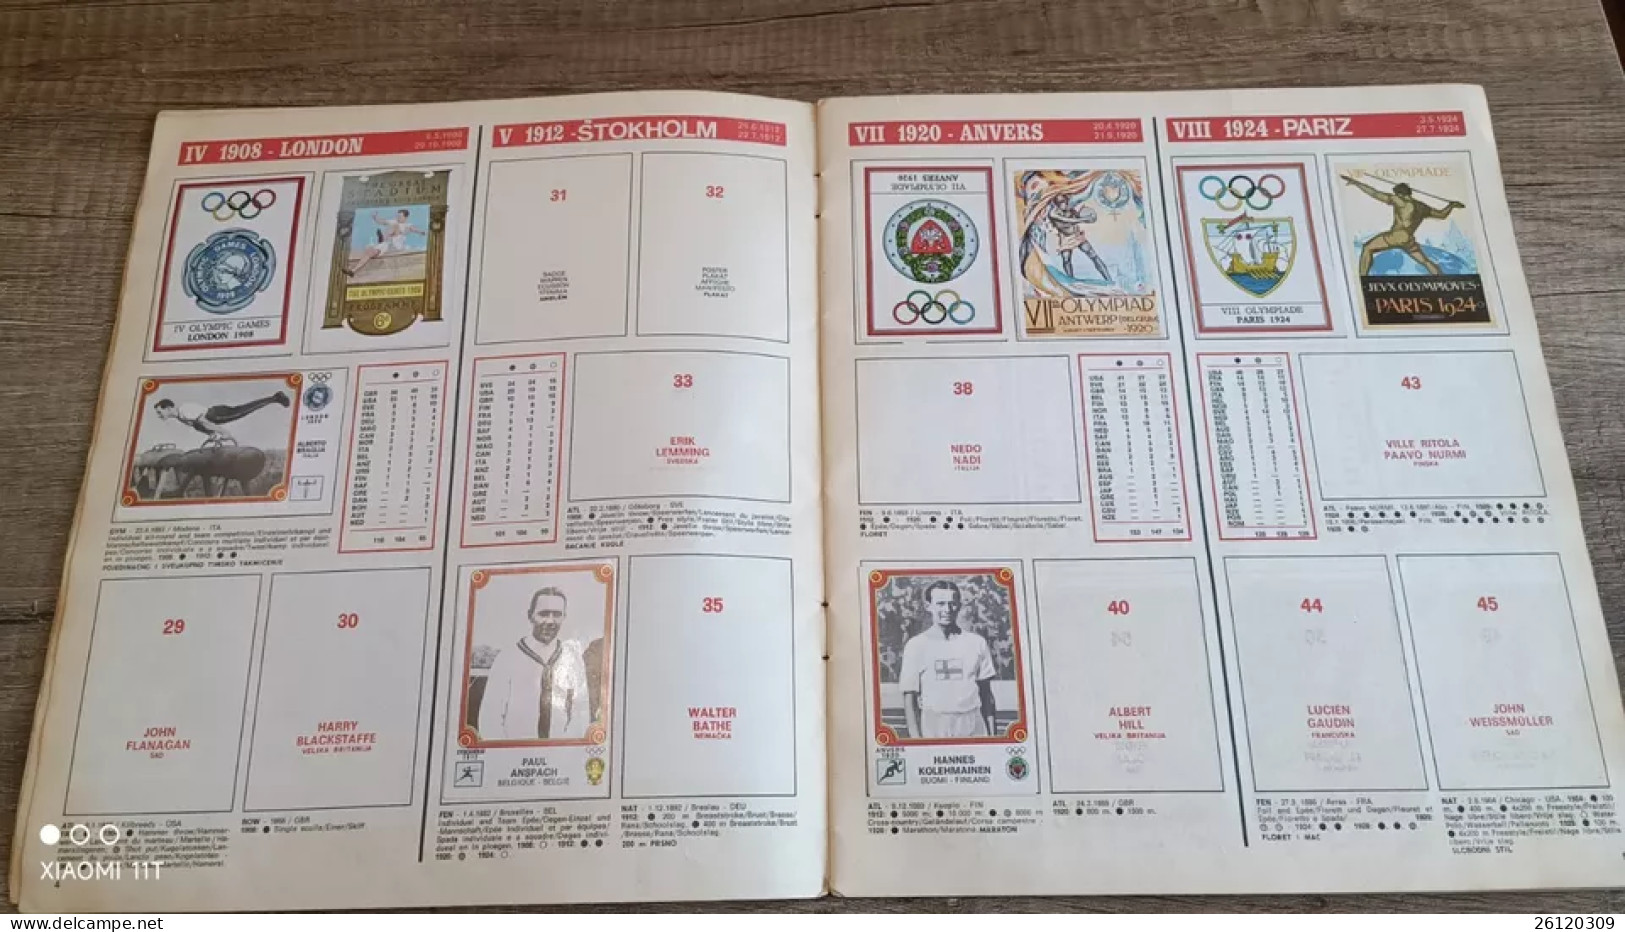 Montreal 1976 Panini Album From ex Yugoslavian Edition PAYPAL ONLY